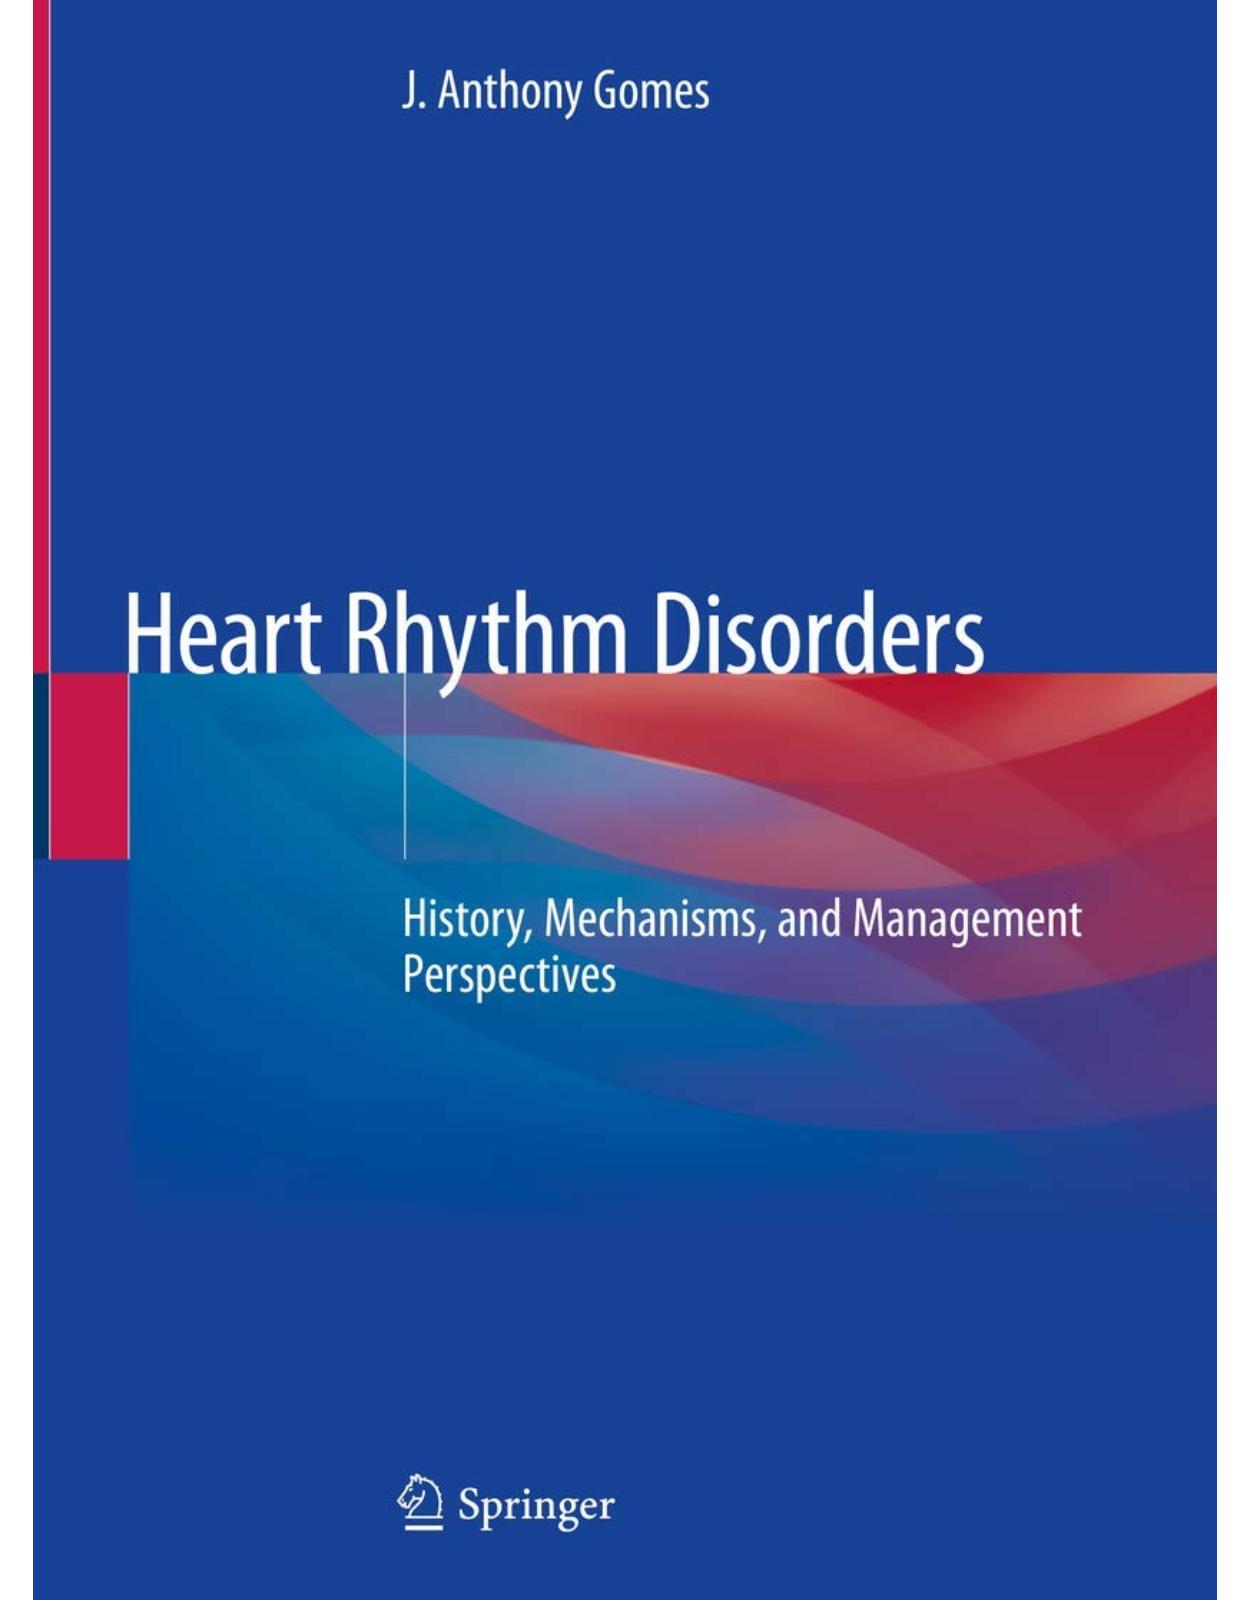 Heart Rhythm Disorders: History, Mechanisms, and Management Perspectives